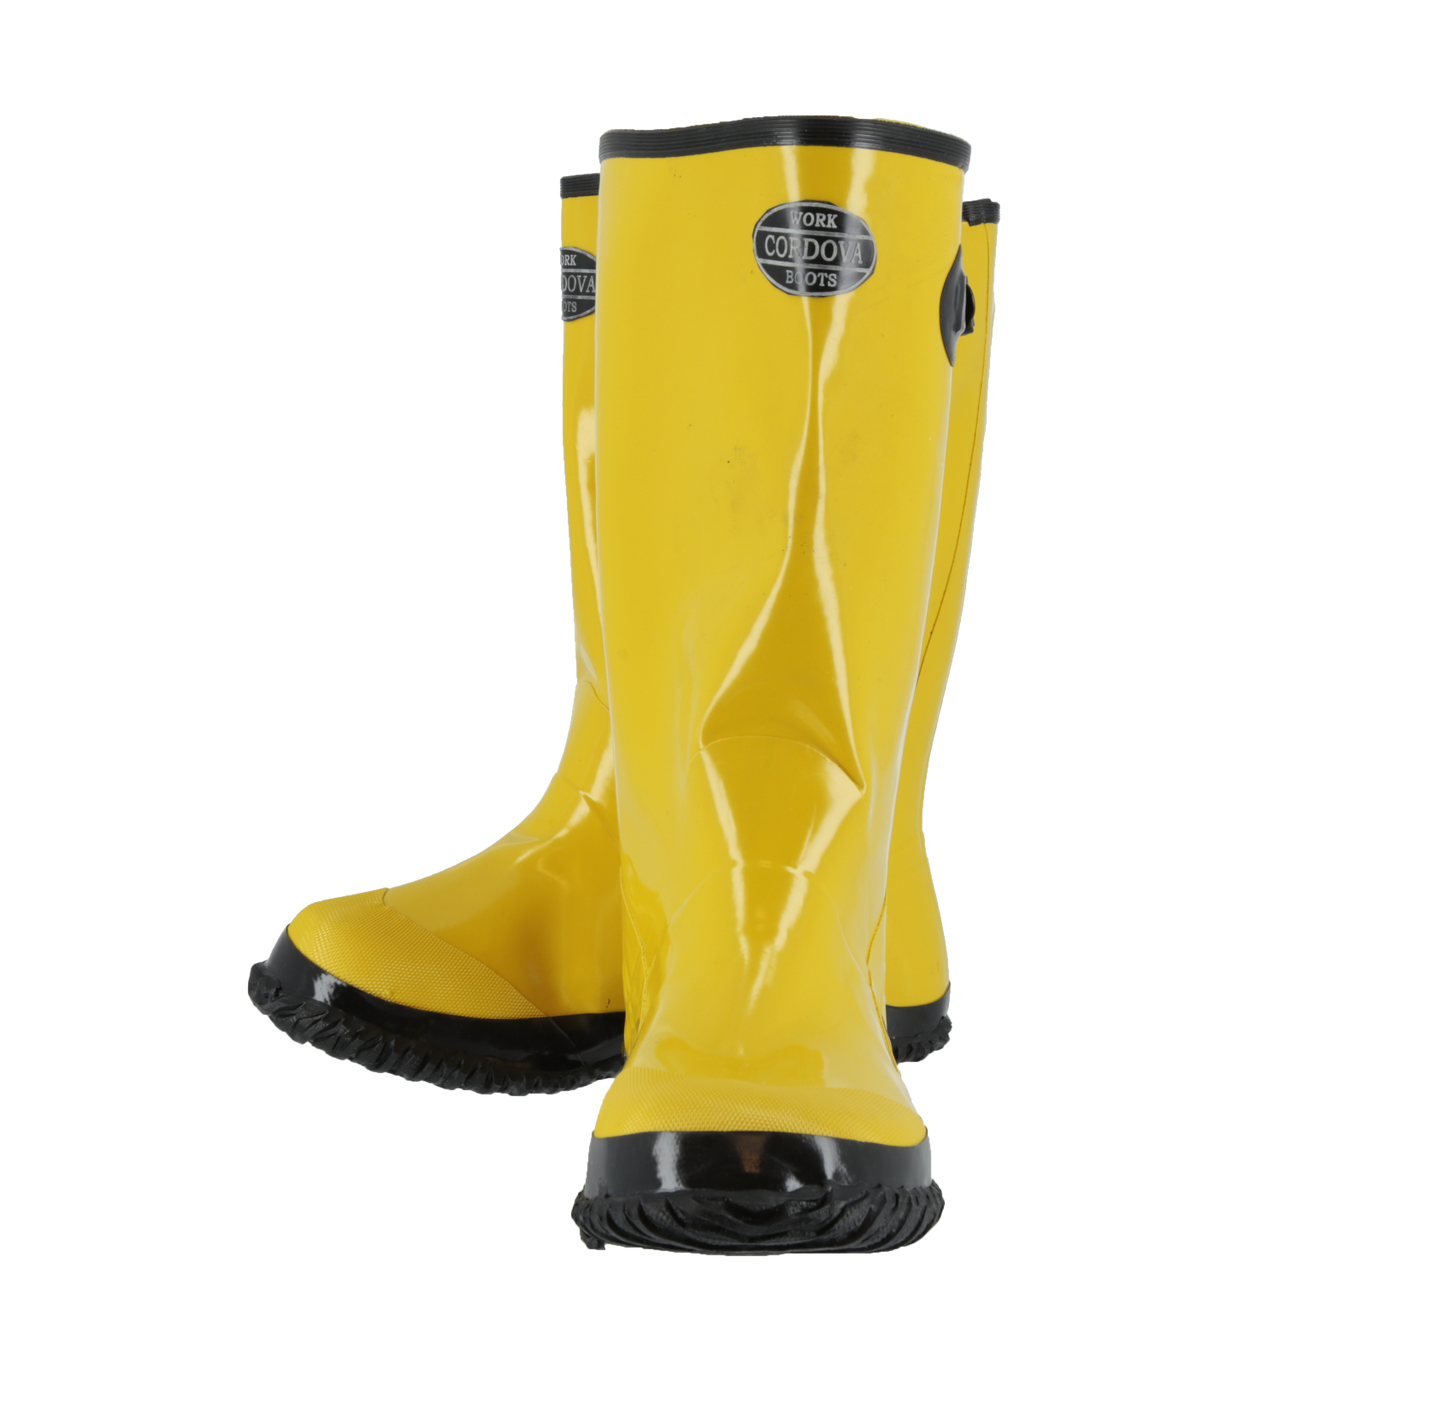 Rubber Boots for Construction and More, Over-the-Shoe Style